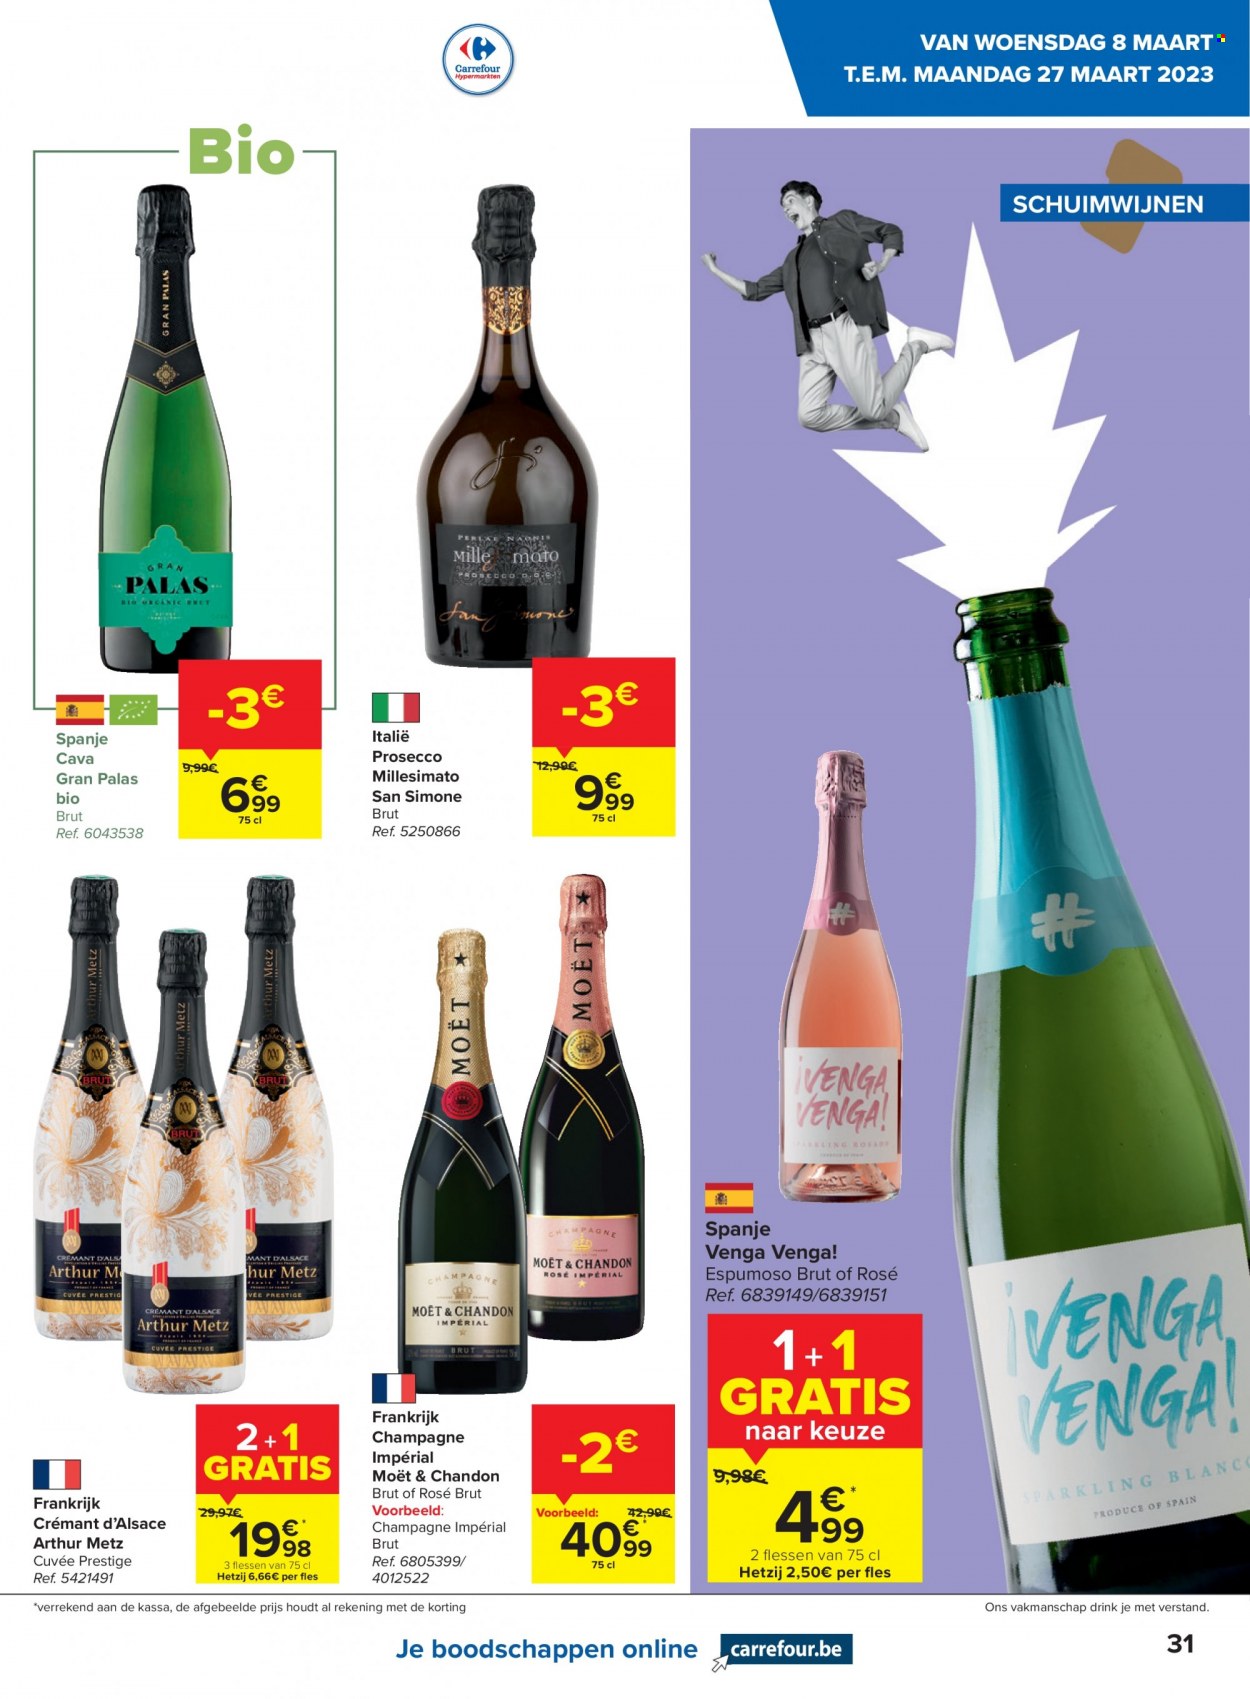 Catalogue Carrefour hypermarkt - 8.3.2023 - 27.3.2023. Page 15.